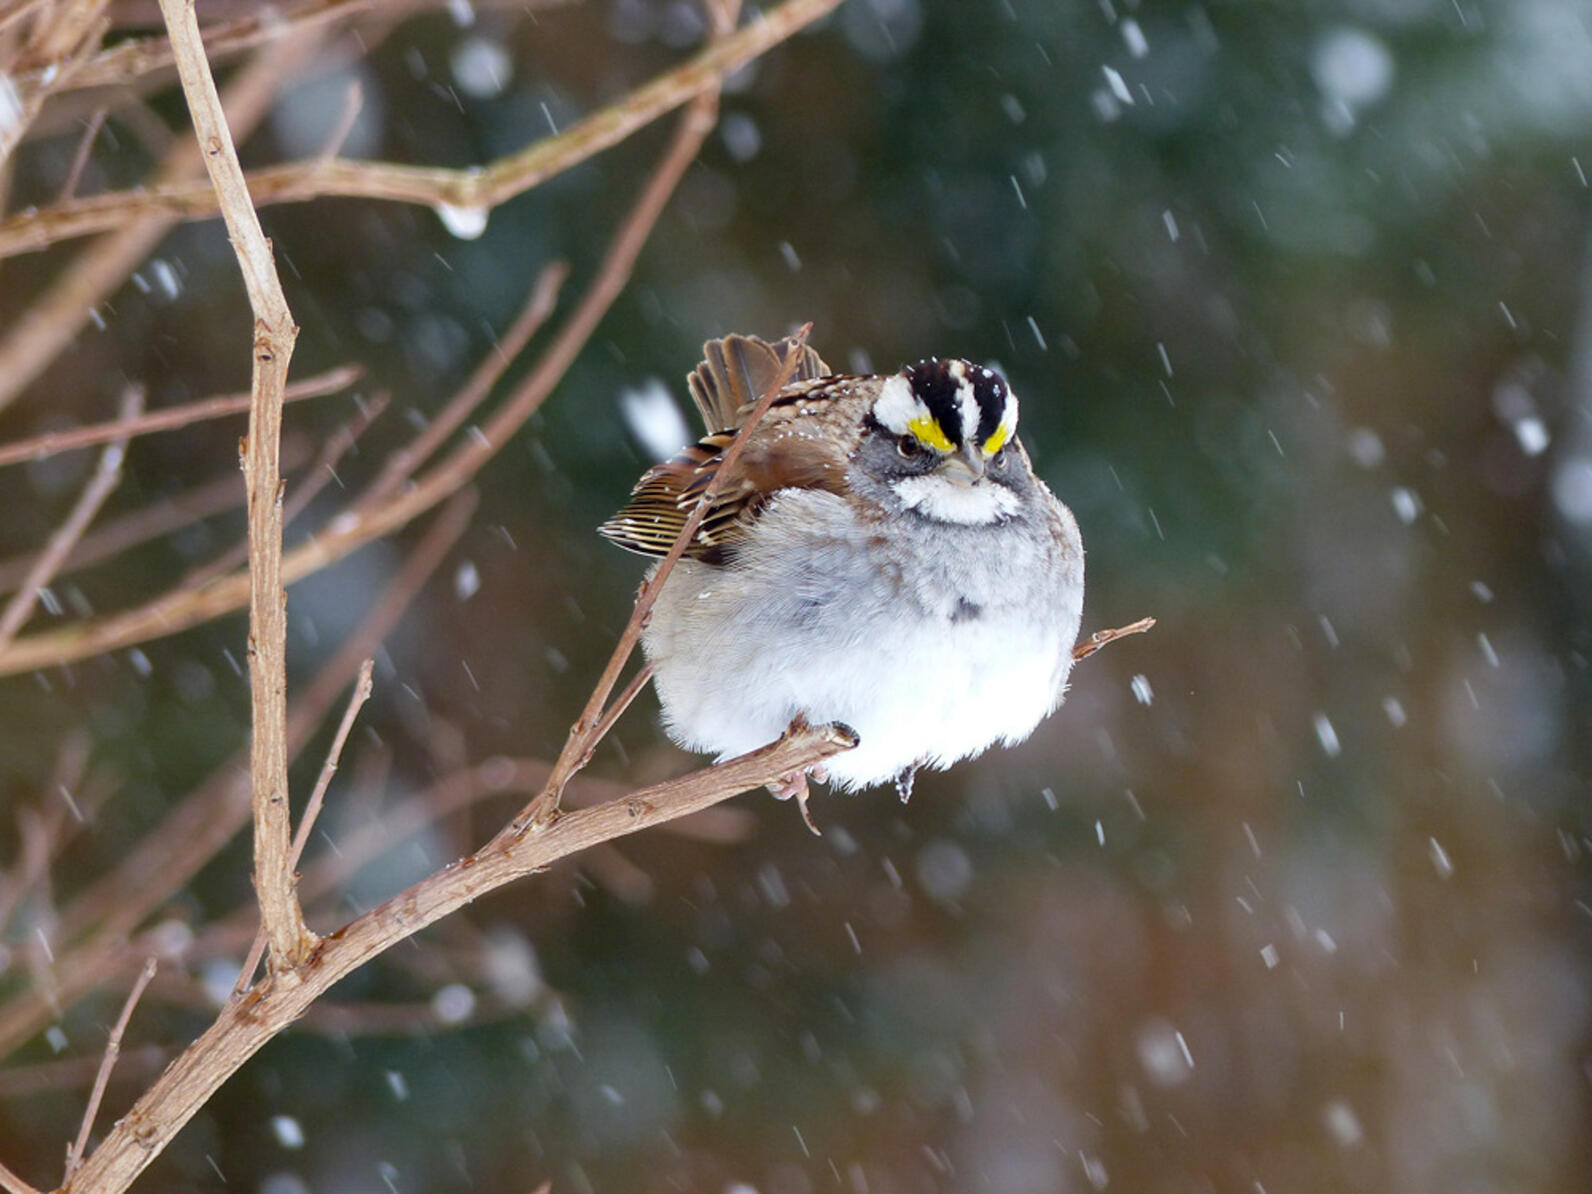 White-throated Sparrow perched on a tree branch with snow falling around it